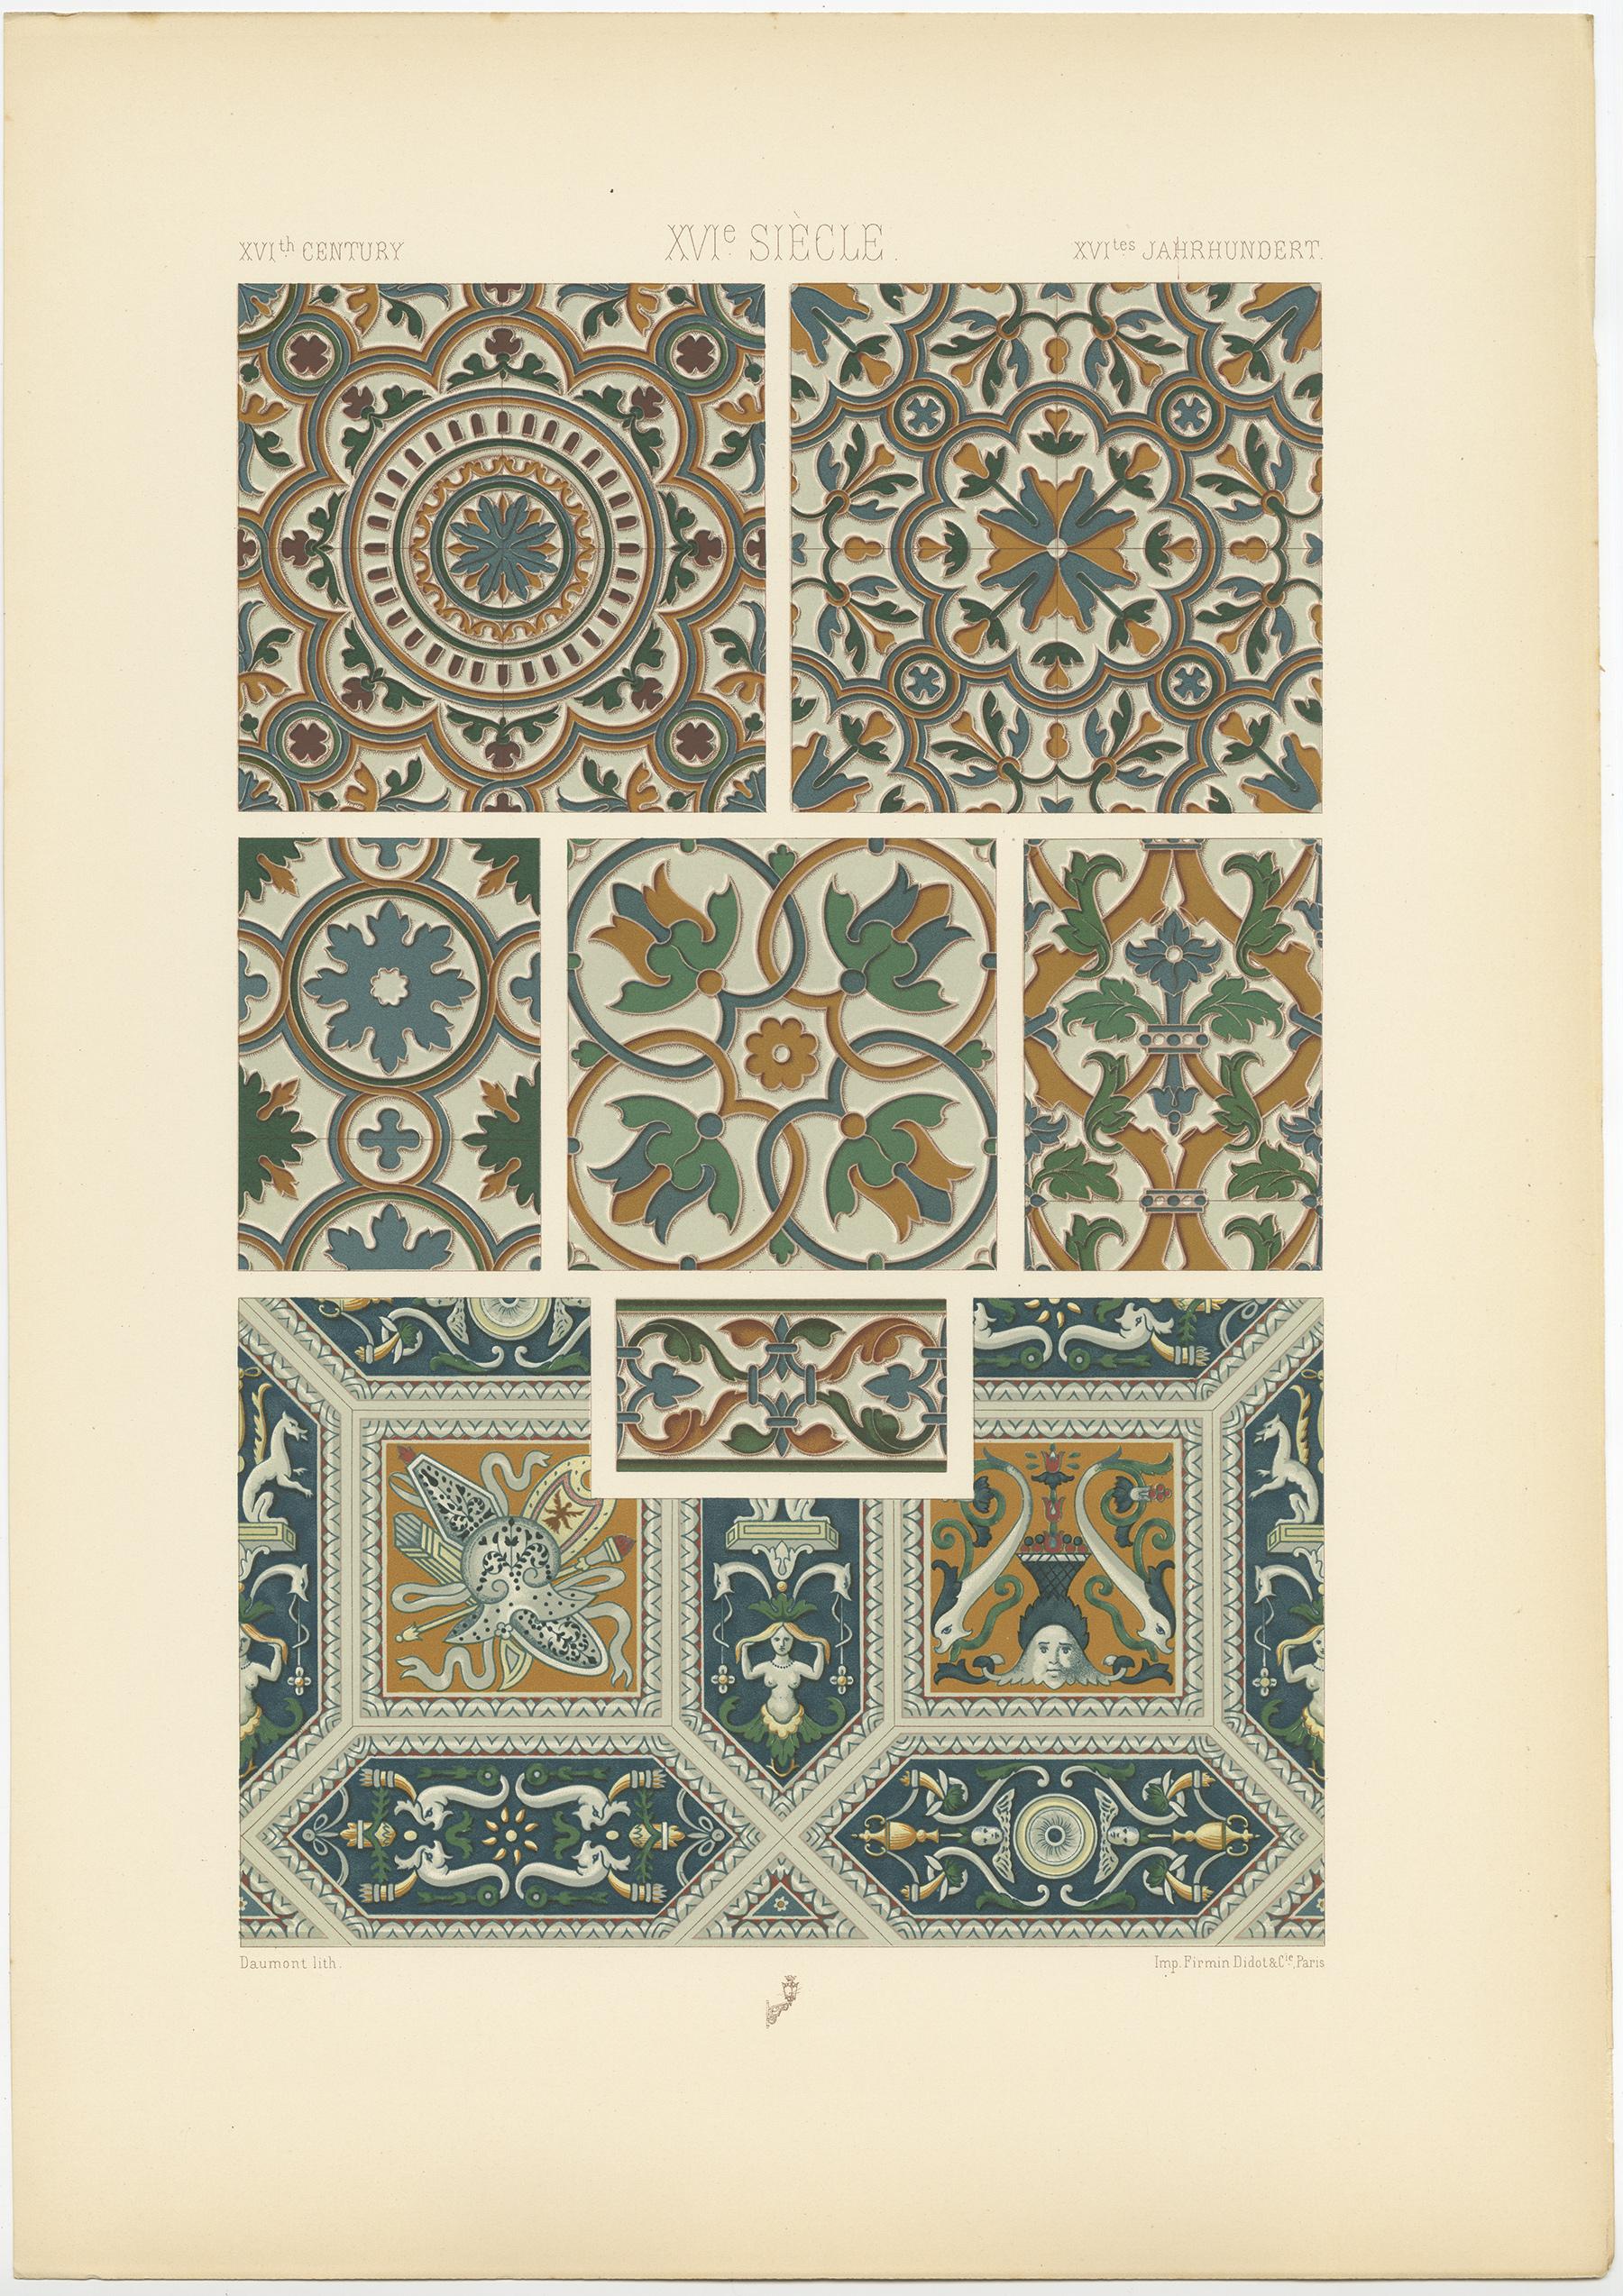 Antique print titled 'Renaissance - Renaissance - Renaissance'. Chromolithograph of glazed paving and wall tiles, Spanish and Italian 16th century ornaments. This print originates from 'l'Ornement Polychrome' by Auguste Racinet. Published circa 1890.